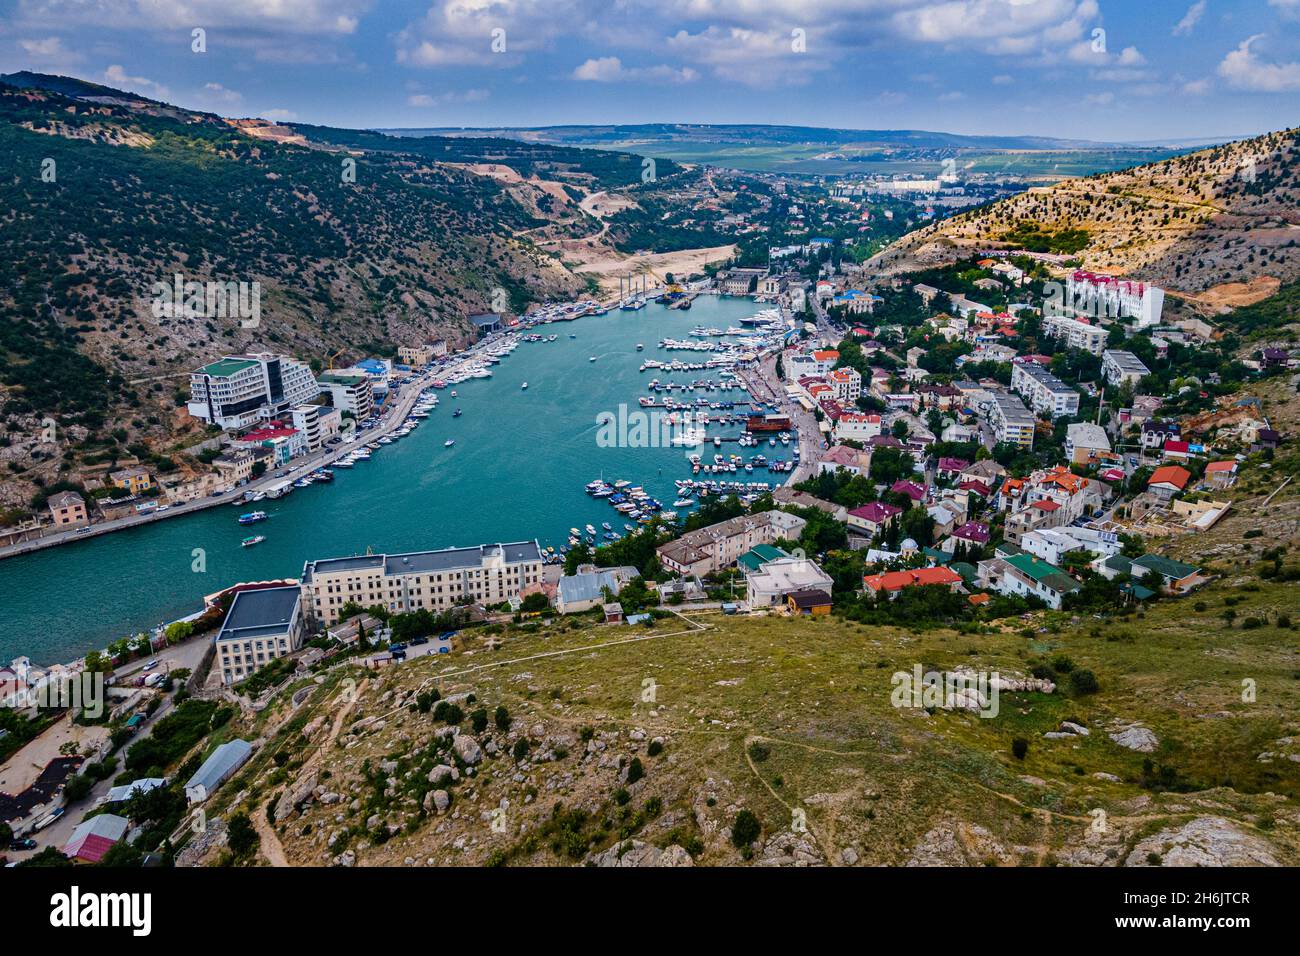 Aerial of the castle and bay of Balaklava, Crimea, Russia, Europe Stock Photo